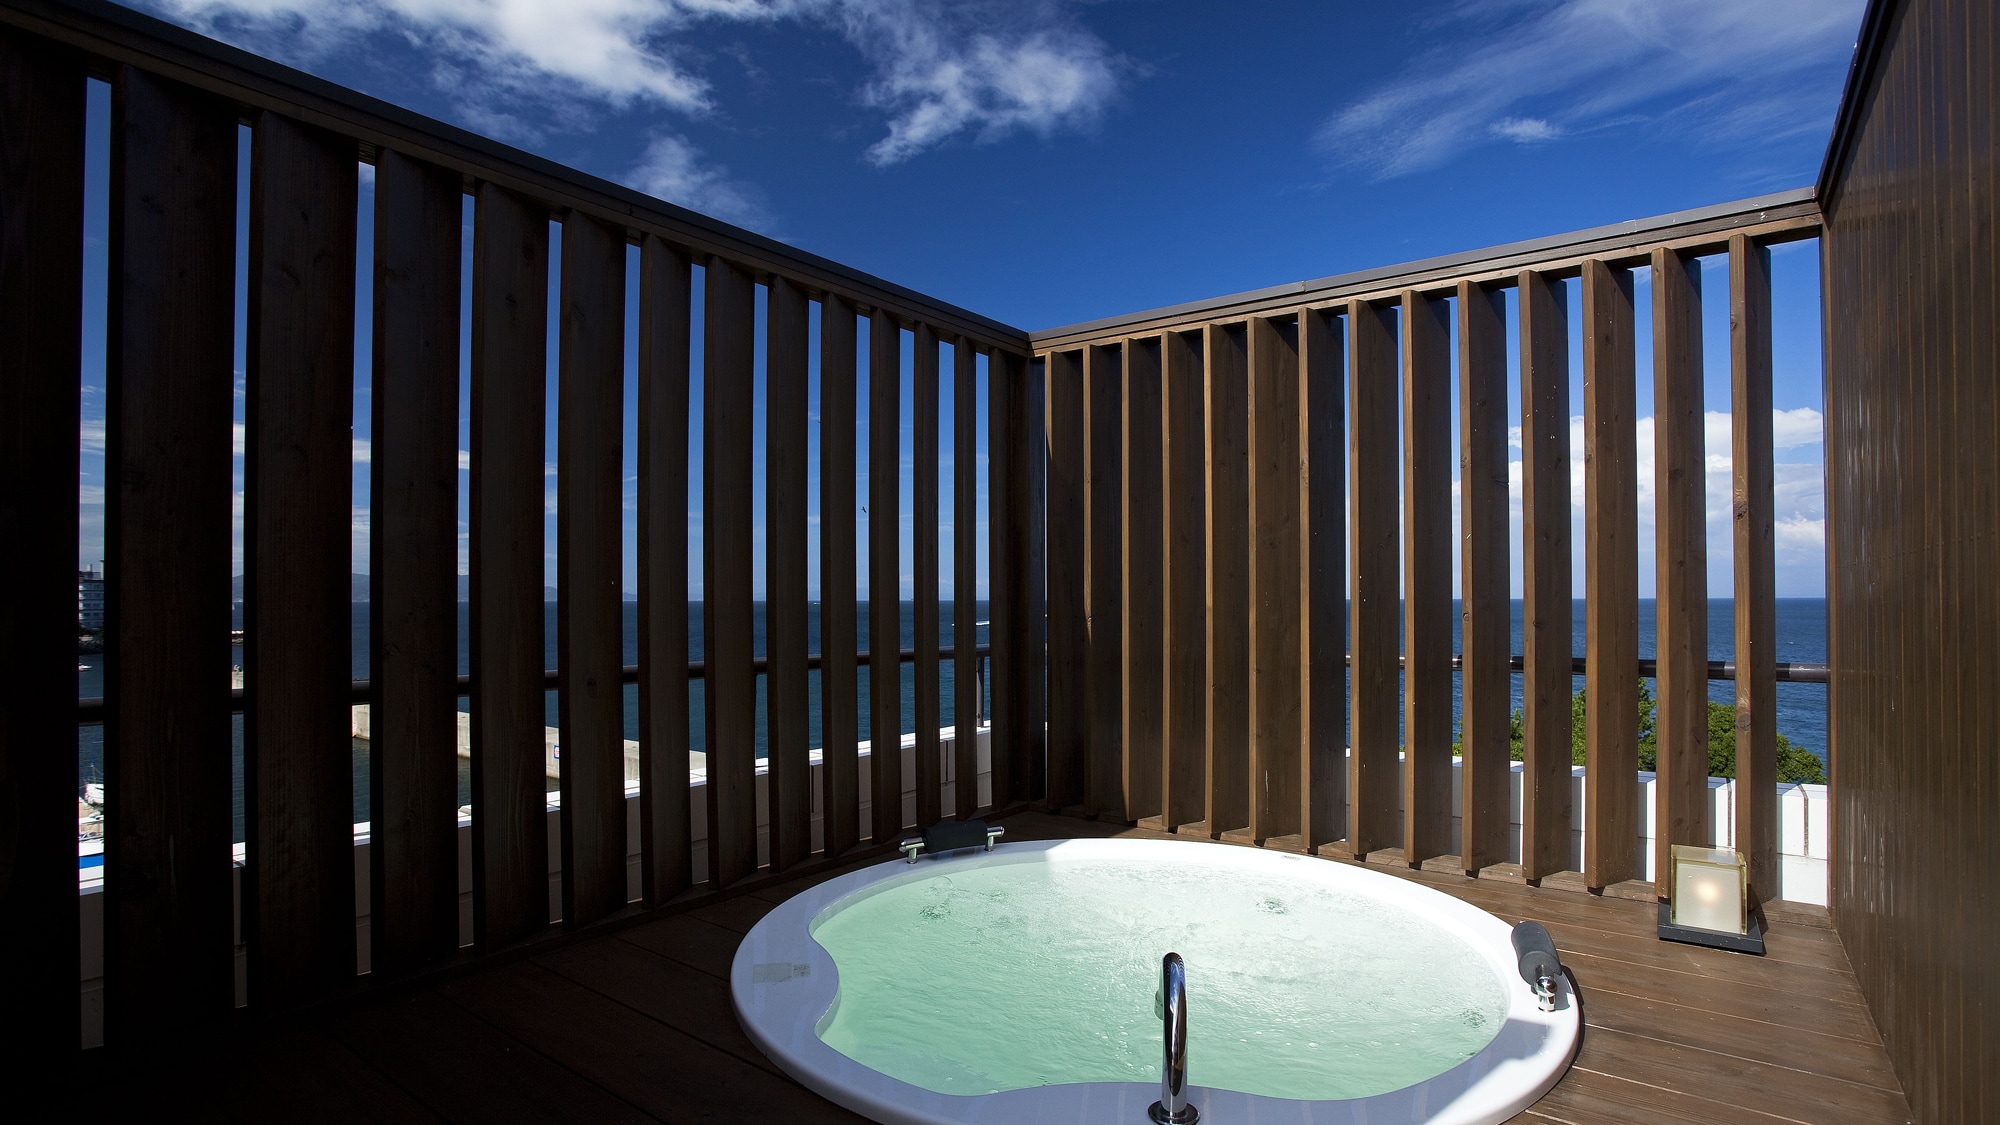 ≪Ocean spa terrace room with hot spring open-air bath≫ Guest room with jacuzzi type private open-air bath